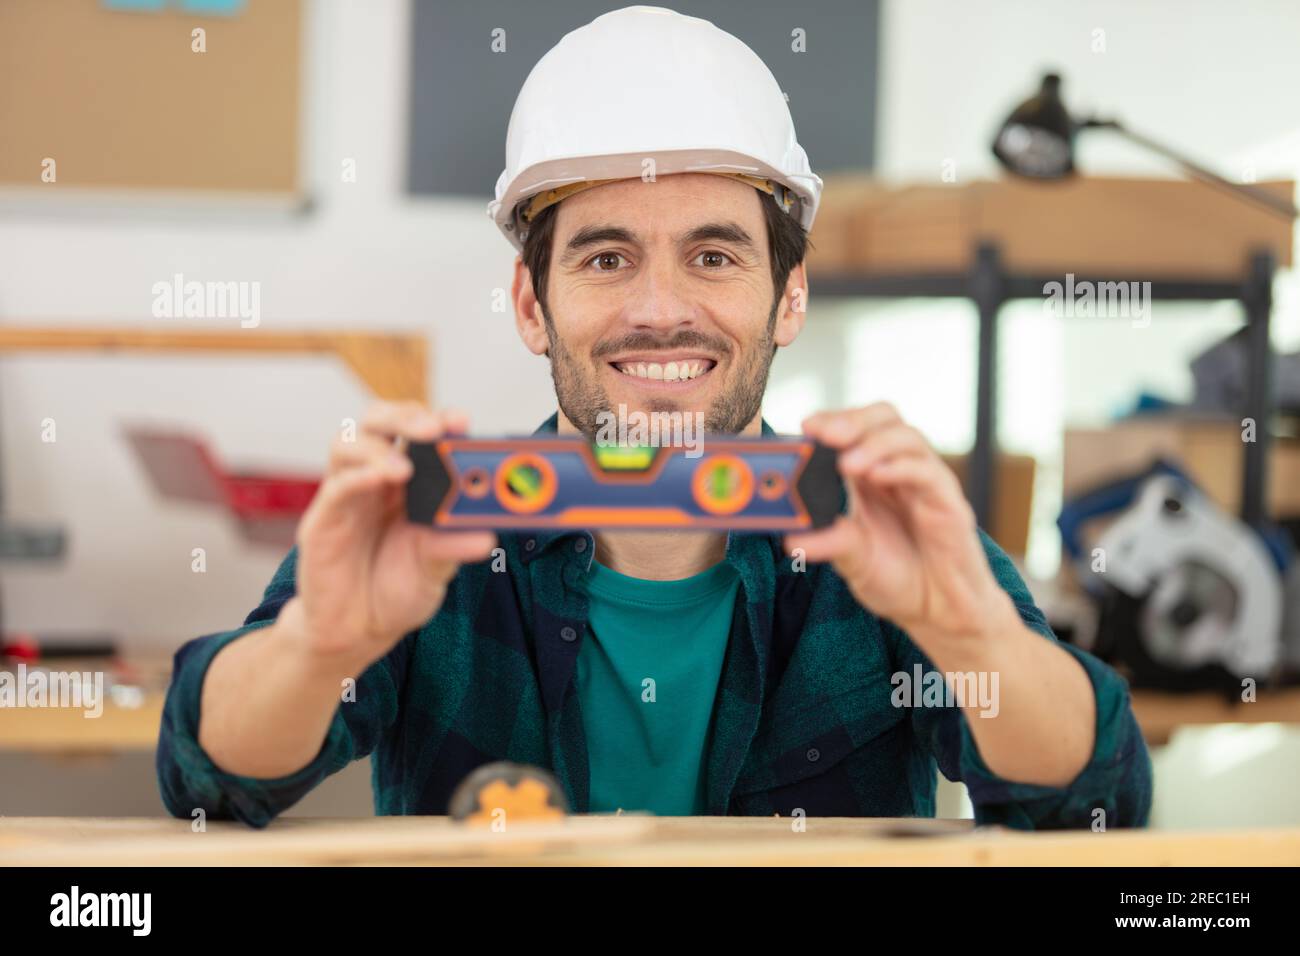 male engineer in workshop showing his spirit level Stock Photo